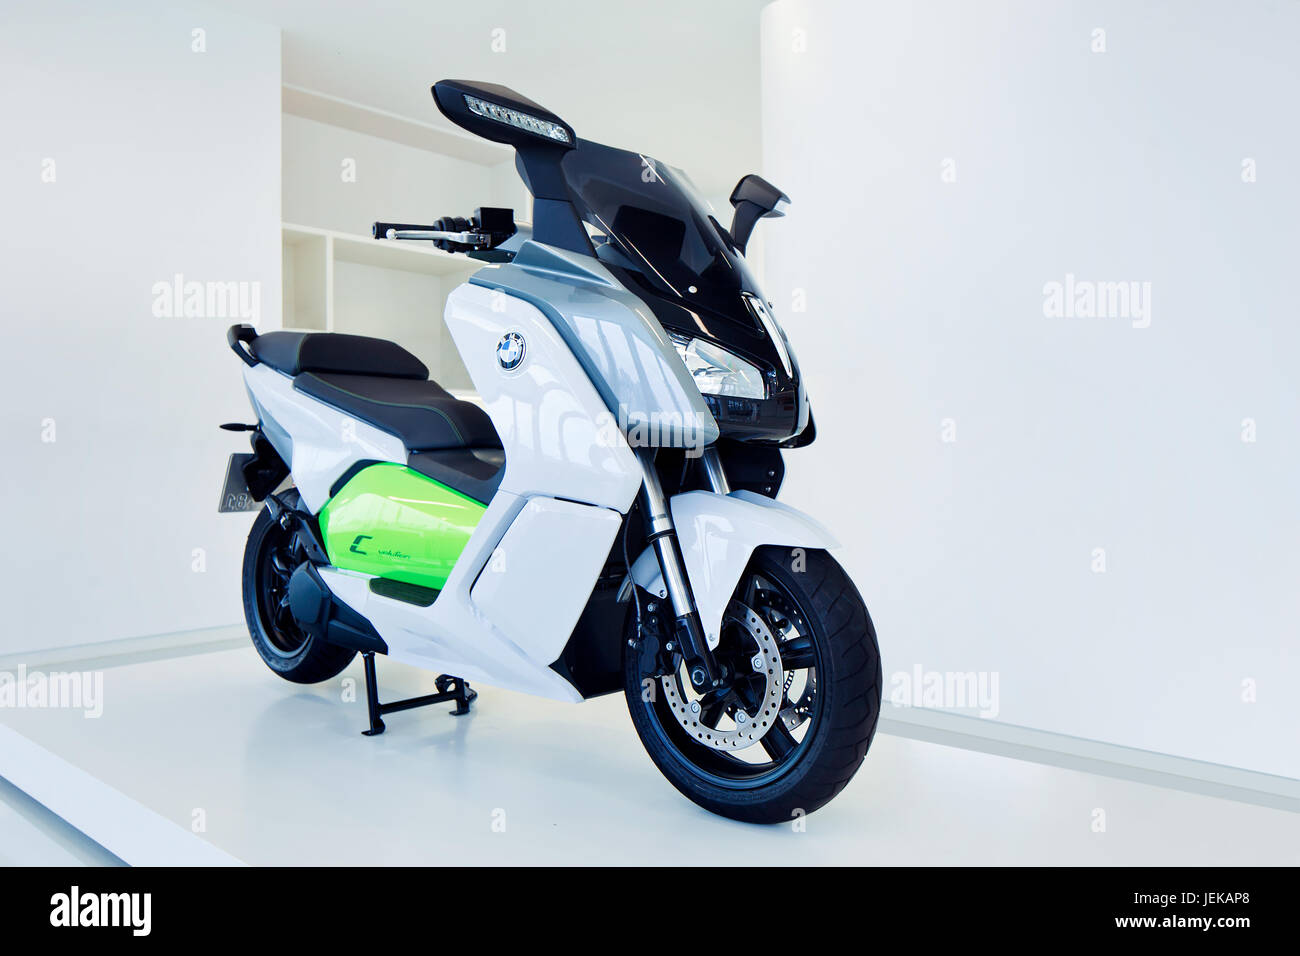 BMW C Evolution e-scooter near-production prototype. It has a powerful motor, output of 11 kW and peak output of 35 kW, maximum speed of 75 mph. Stock Photo